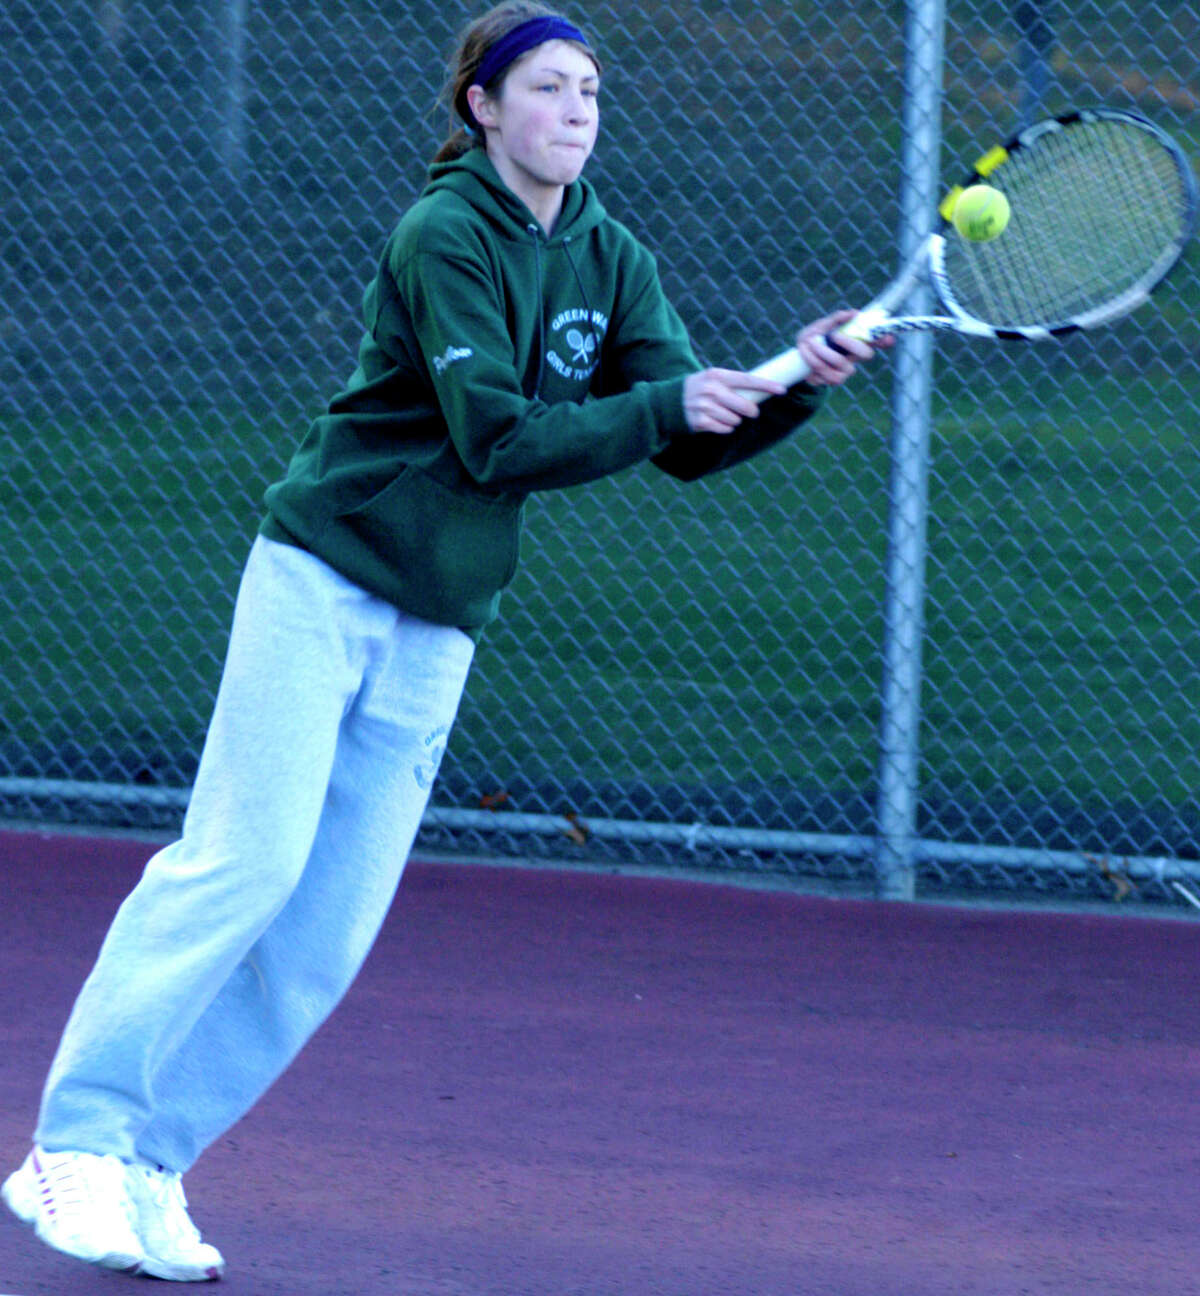 SPECTRUM/The Green Wave's Lindsey Partelow maintains her focus as she preps for the New Milford High School girls' tennis campaign. April 2012